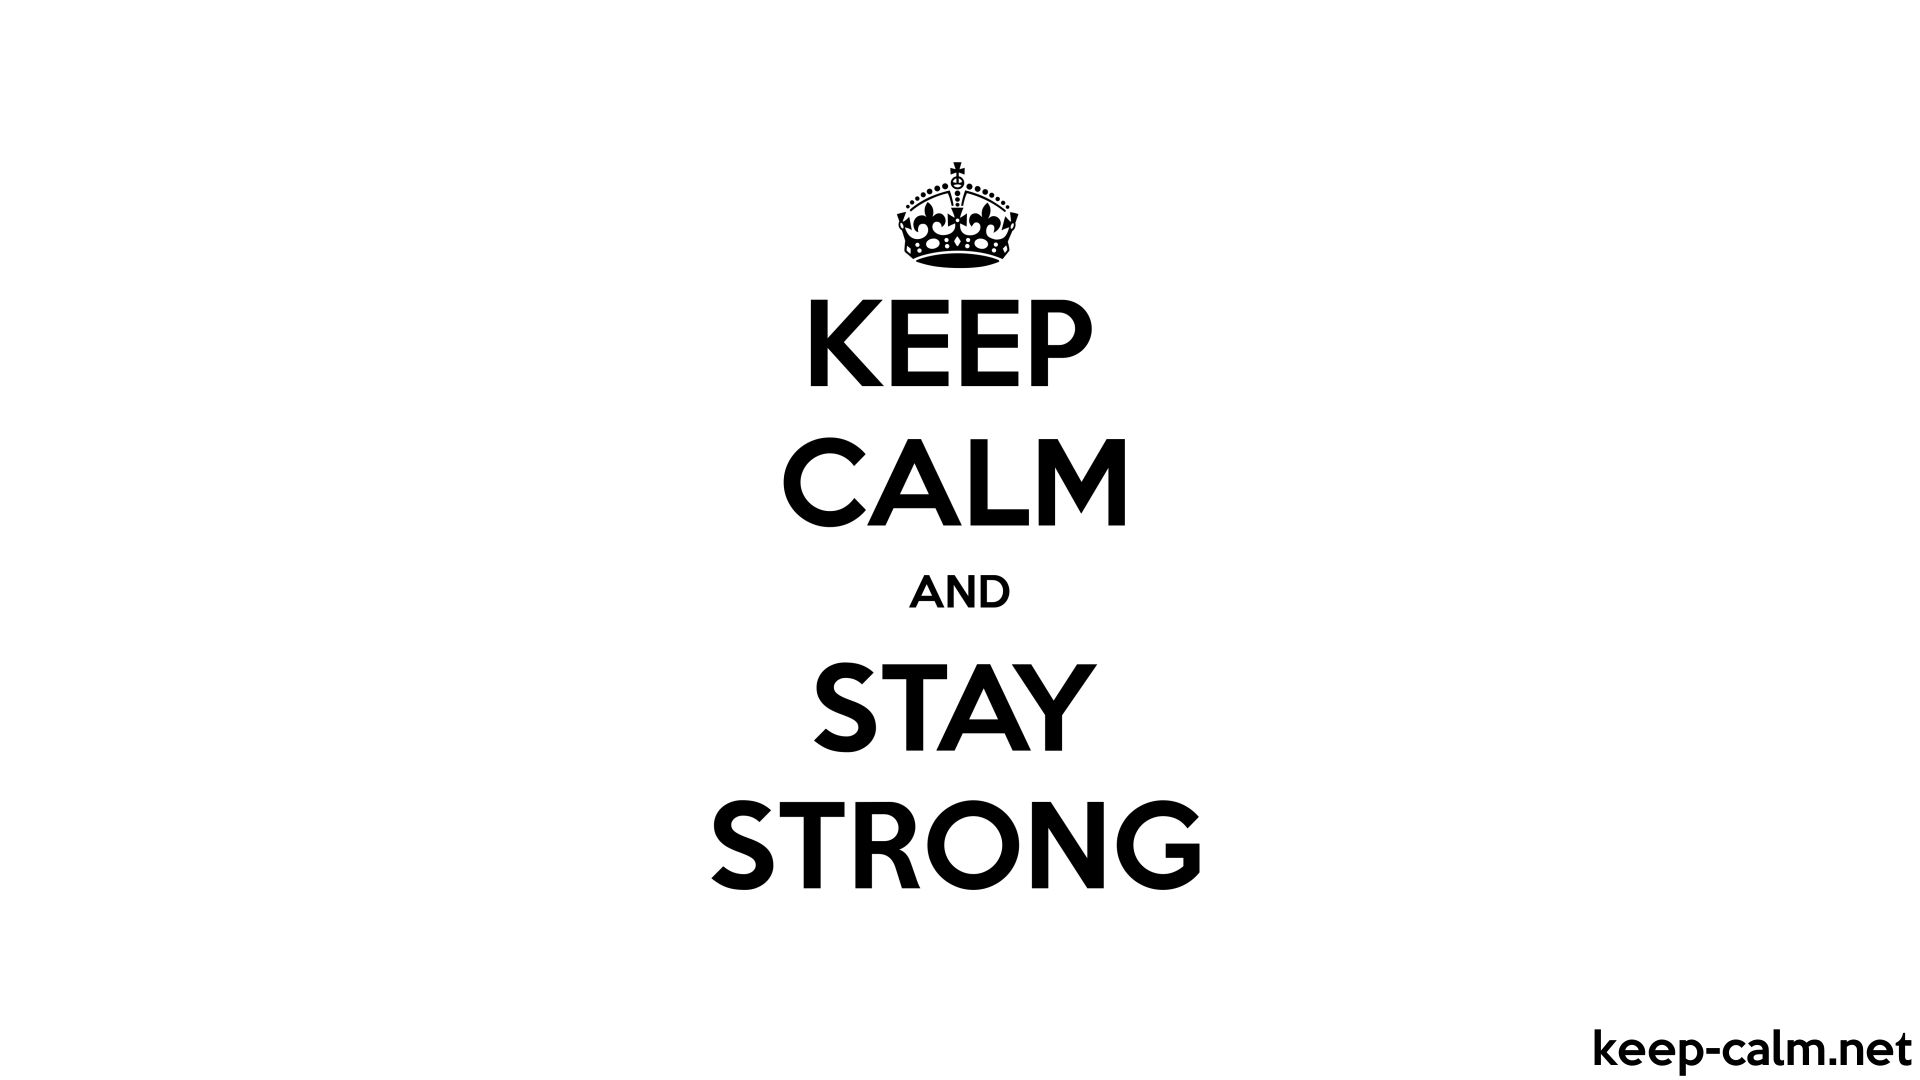 KEEP CALM AND STAY STRONG